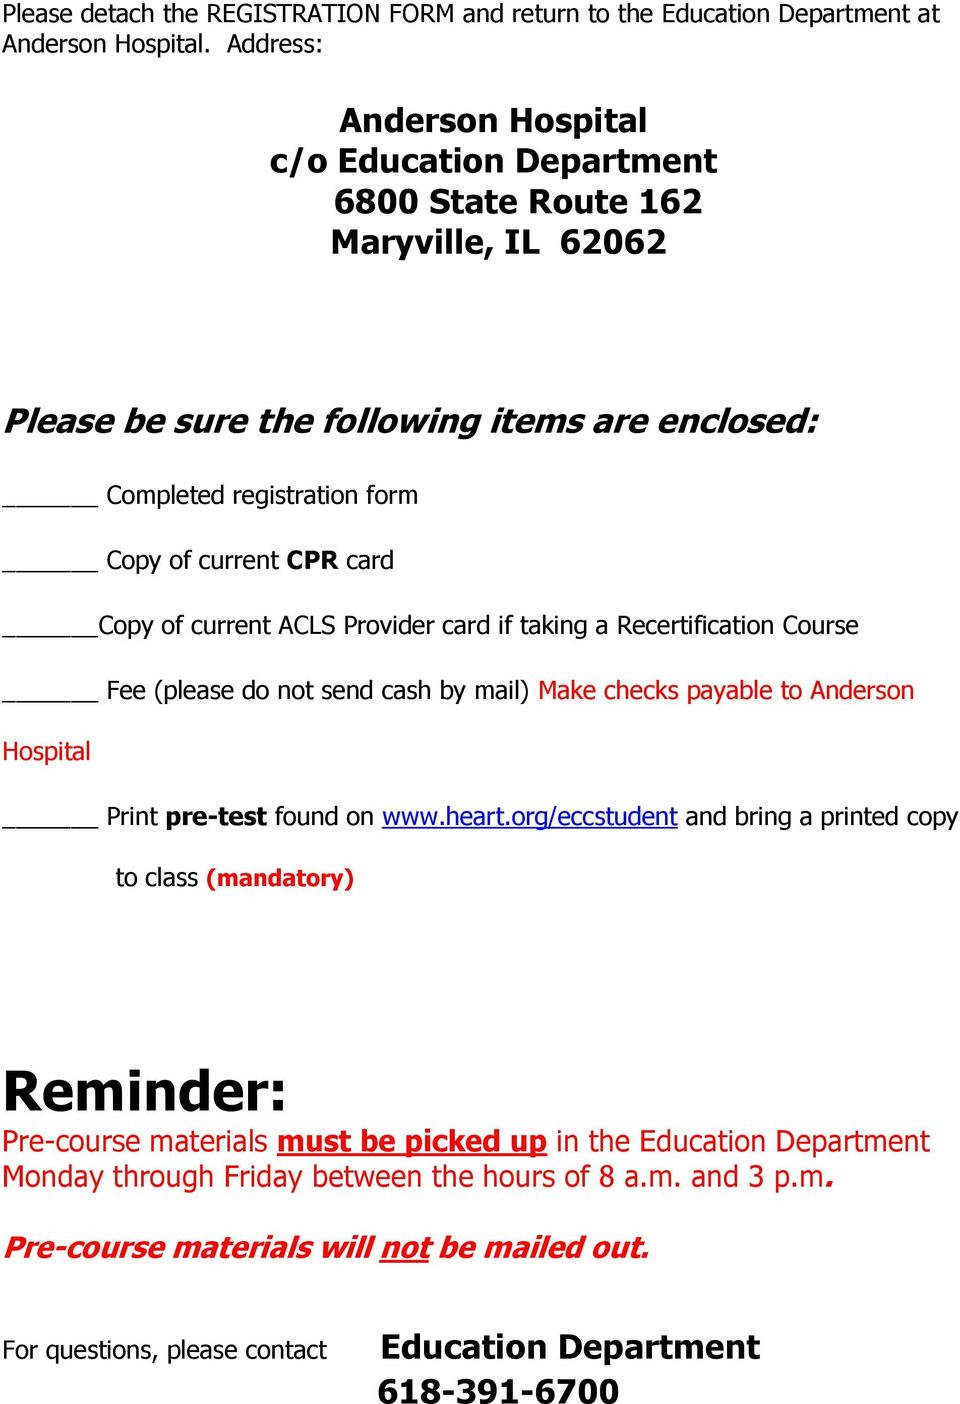 Copy of current ACLS Provider card if taking a Recertification Course Fee (please do not send cash by mail) Make checks payable to Anderson Hospital Print pre-test found on www.heart.